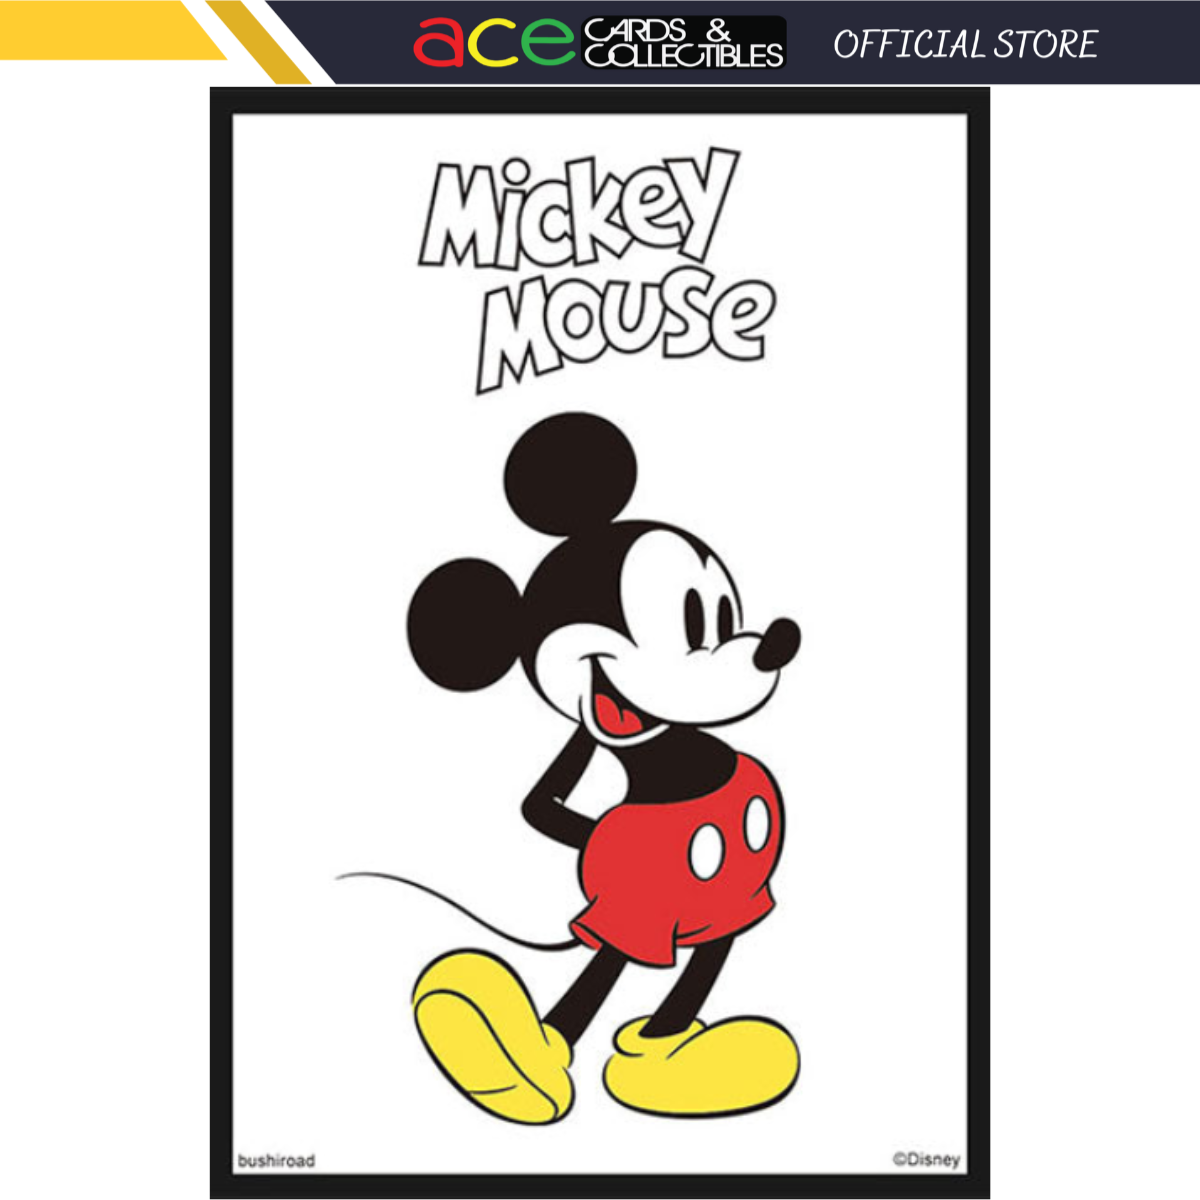 Bushiroad Sleeve Collection - Disney - "Mickey Mouse" (Vol.3677)-Bushiroad-Ace Cards & Collectibles